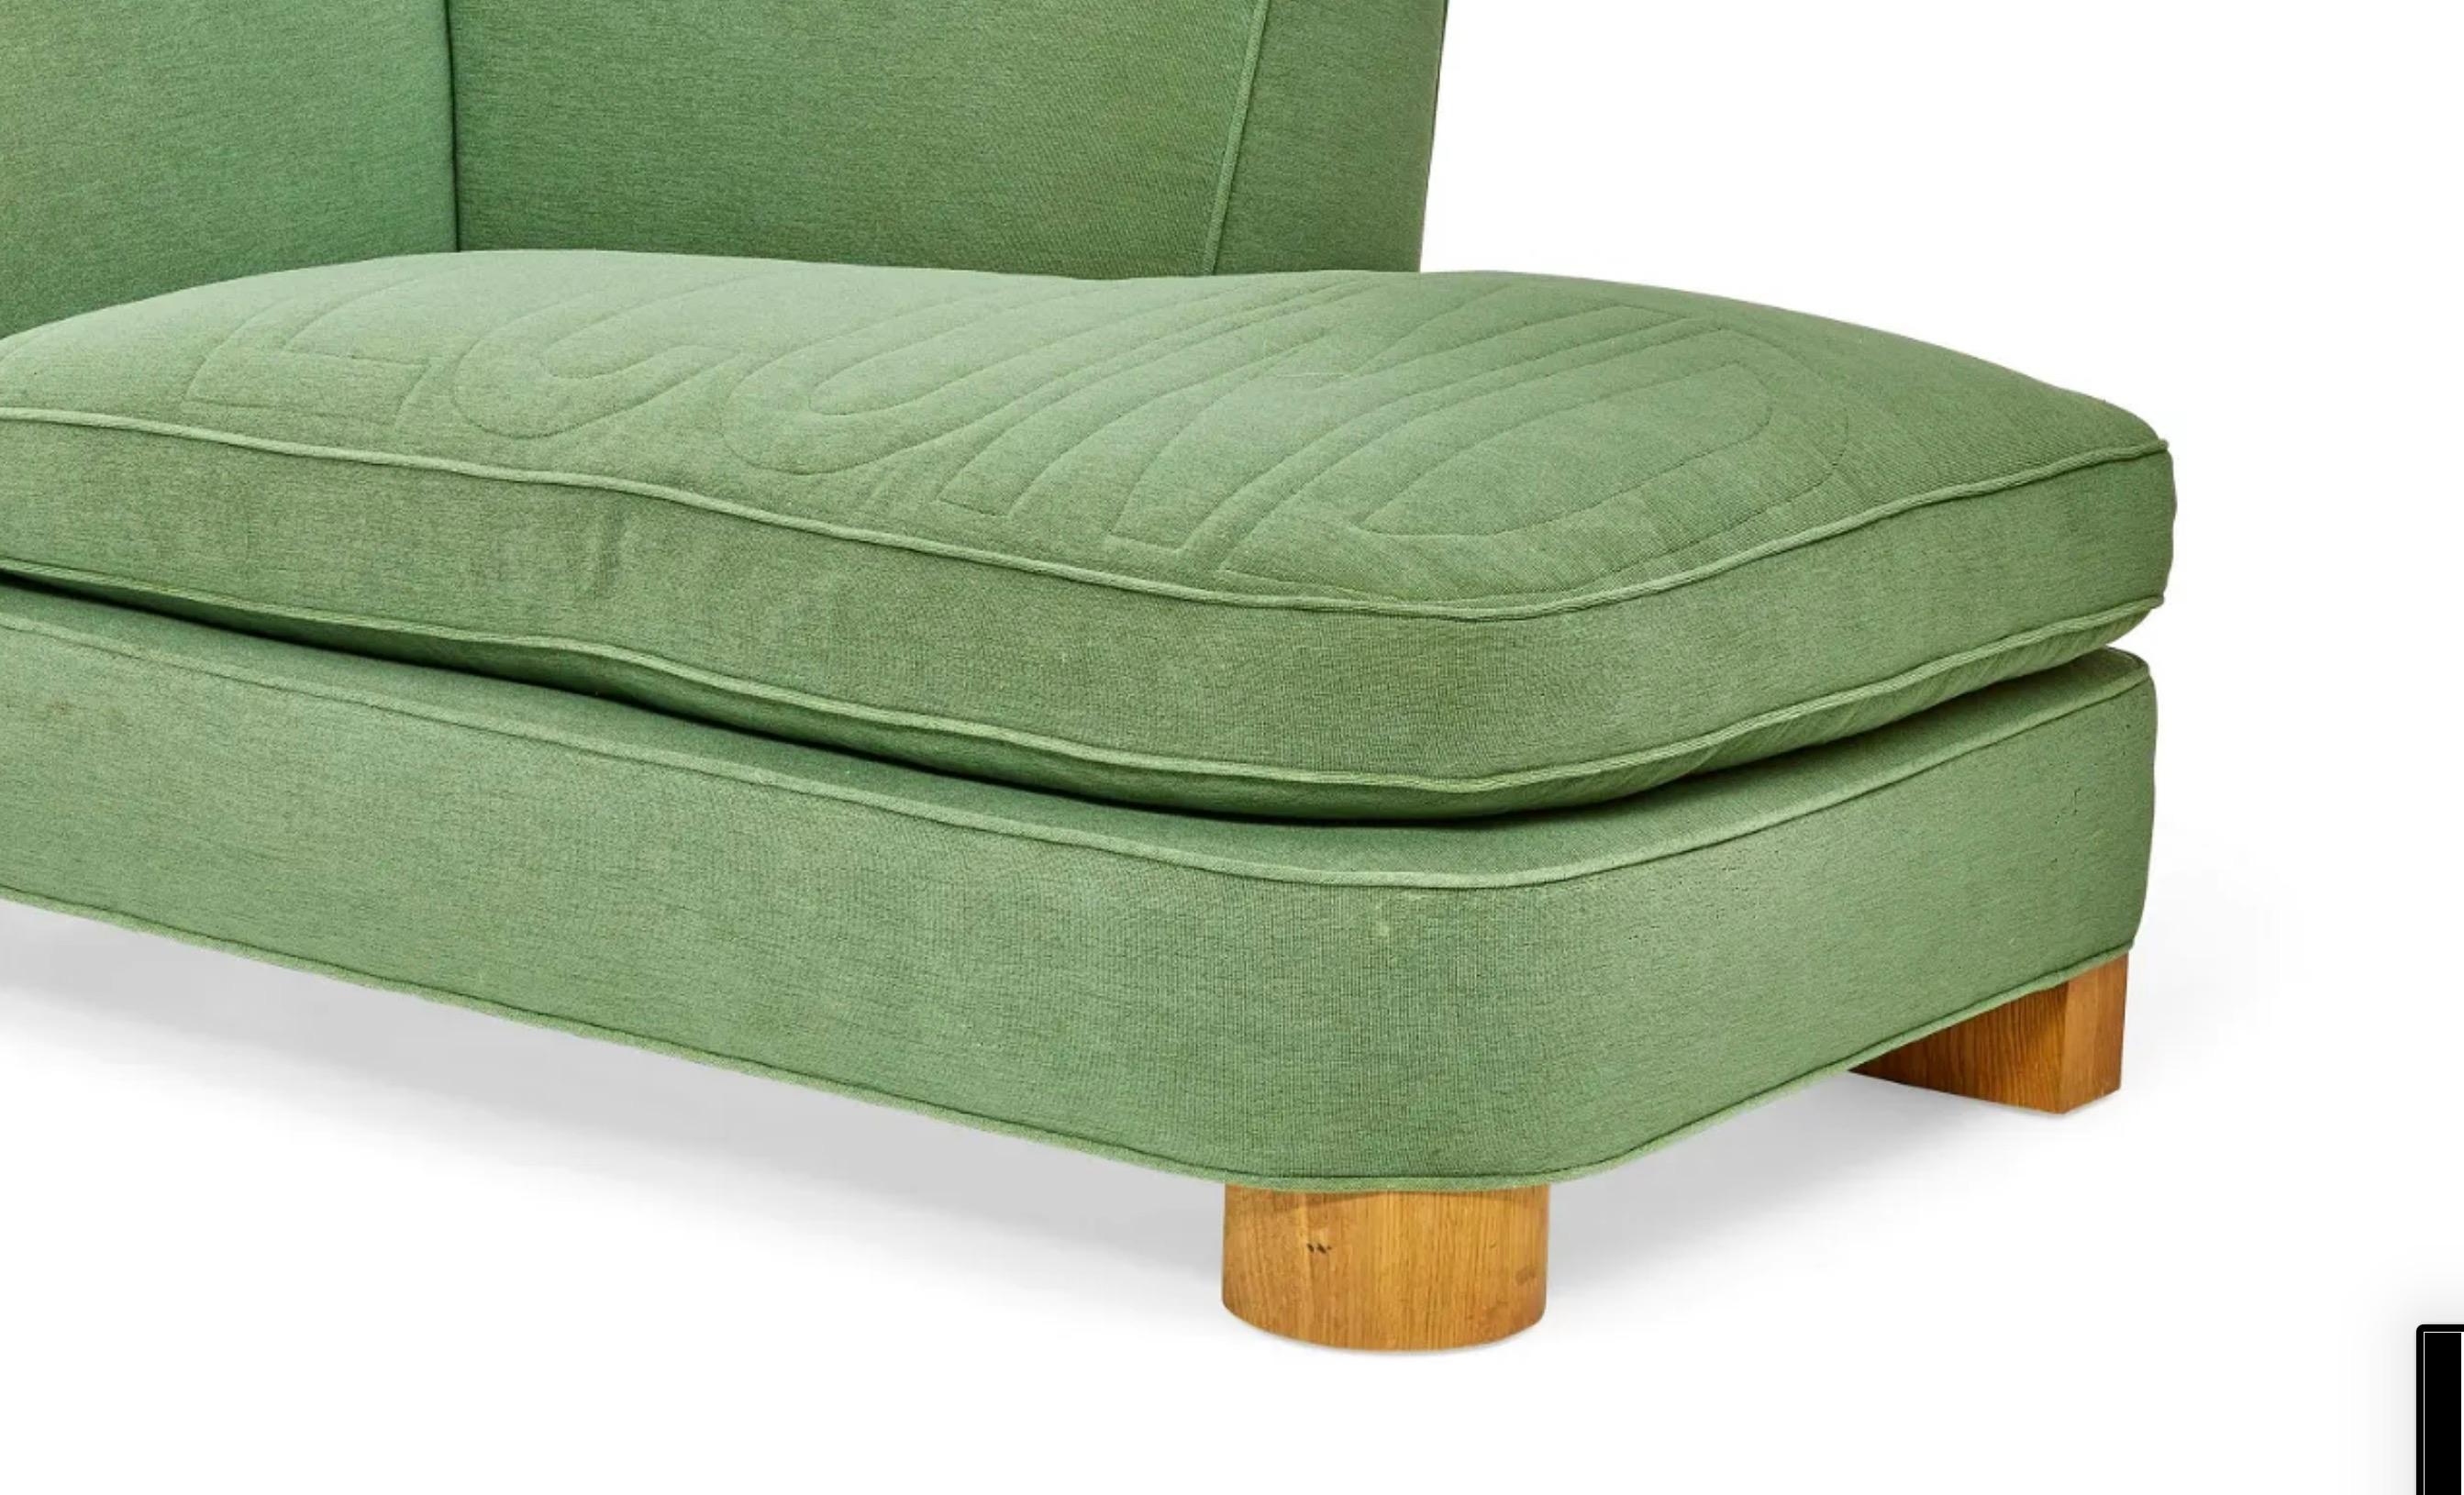 Roy McMakin Postmodern Chaise Longue, Green, Domestic Furniture Co, USA, 1988. Height 33in (84cm); width 63in (160cm); depth 35in (89cm). Provenance: Private Collection, Los Angeles
Roy McMakin is an artist whose predominantly sculptural practice